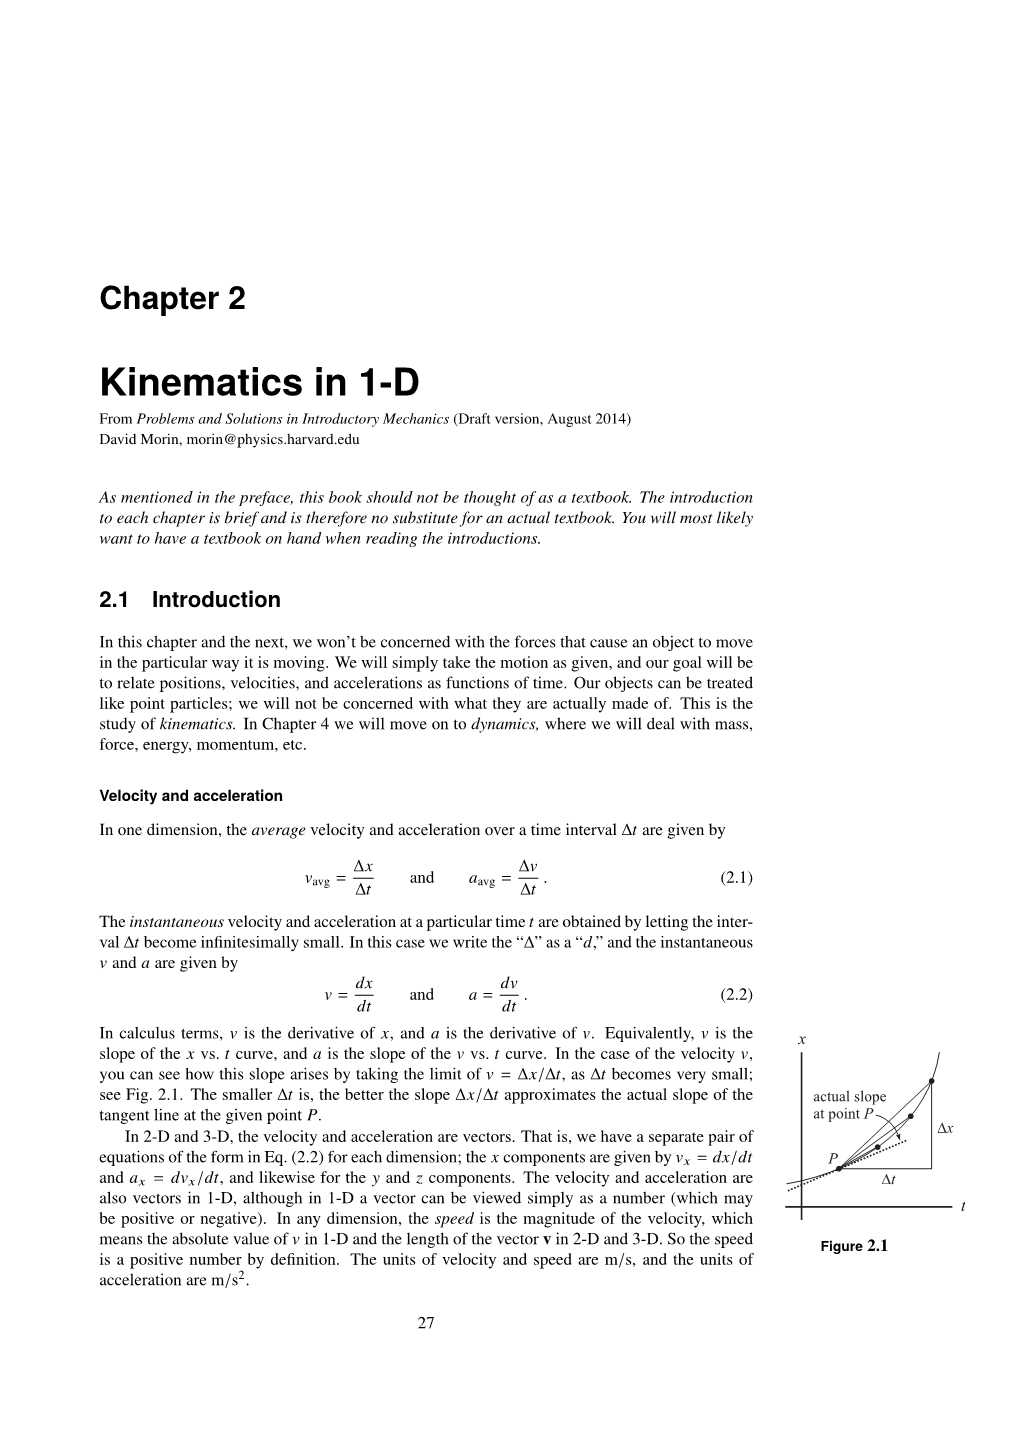 Kinematics in 1-D from Problems and Solutions in Introductory Mechanics (Draft Version, August 2014) David Morin, Morin@Physics.Harvard.Edu